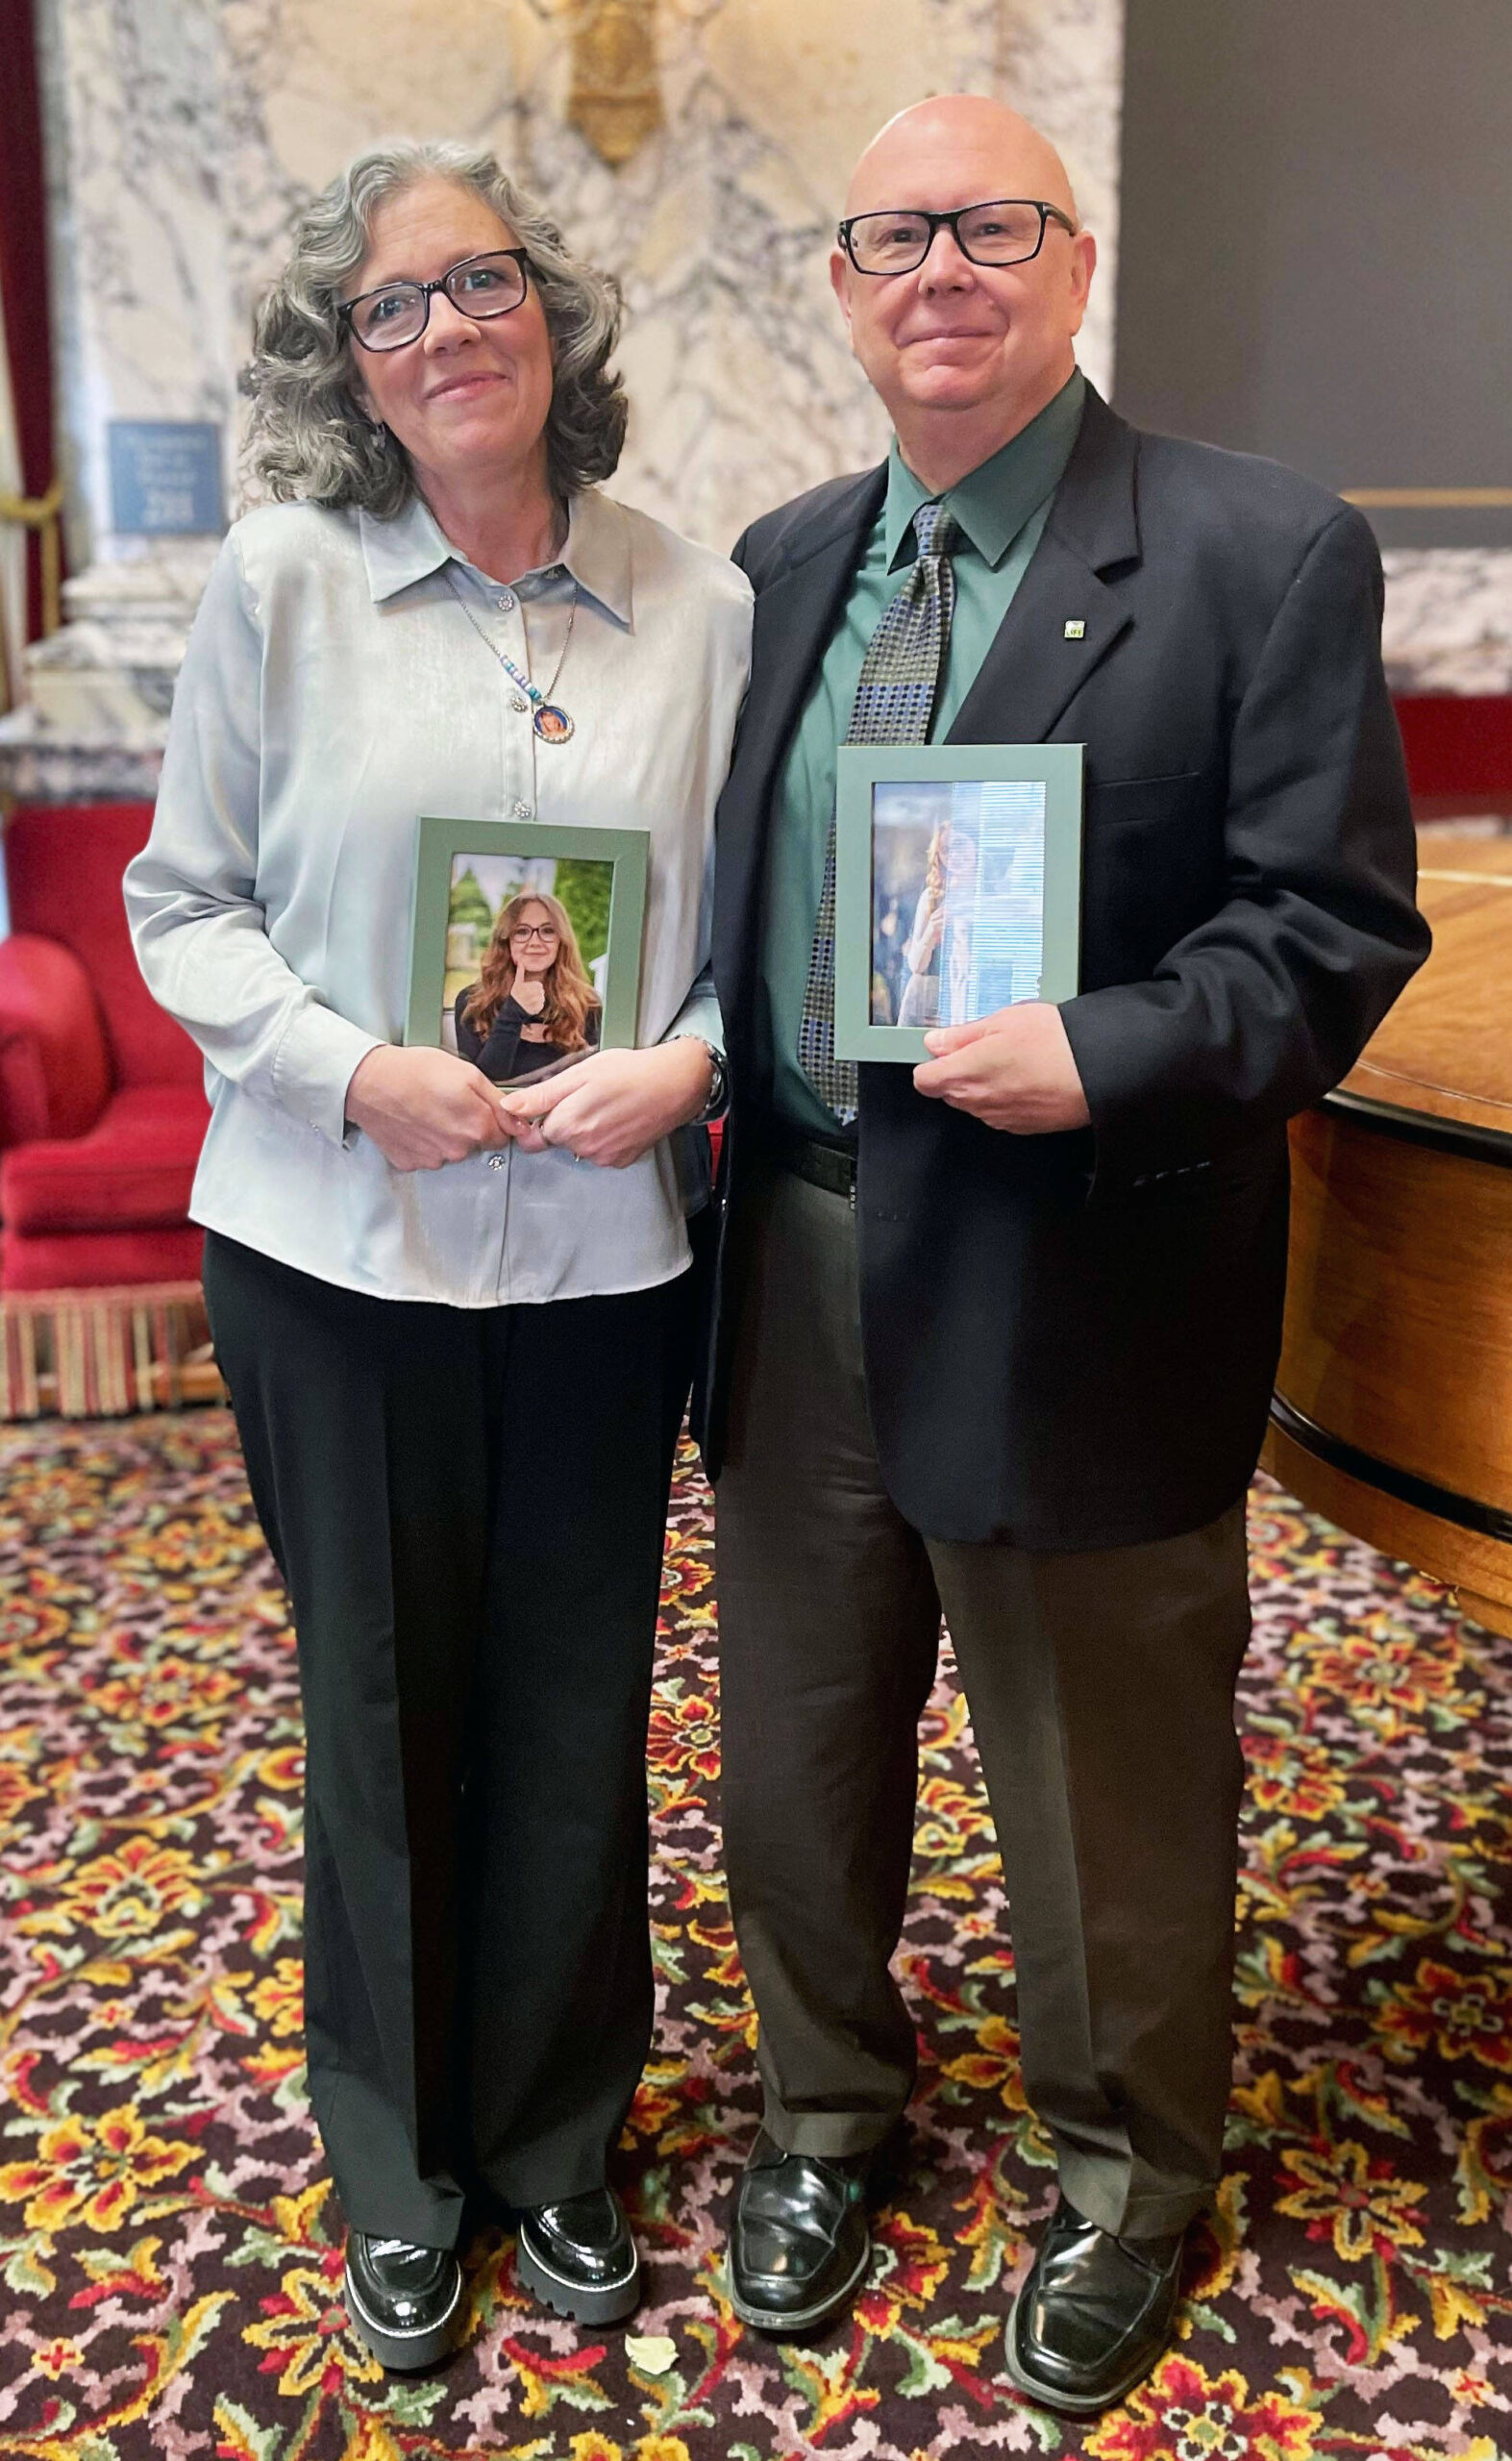 Laura and Todd Goldsmith hold framed portraits of their daughter Madeline Goldsmith inside the Capitol building in Olympia. COURTESY PHOTO, LifeCenter Northwest